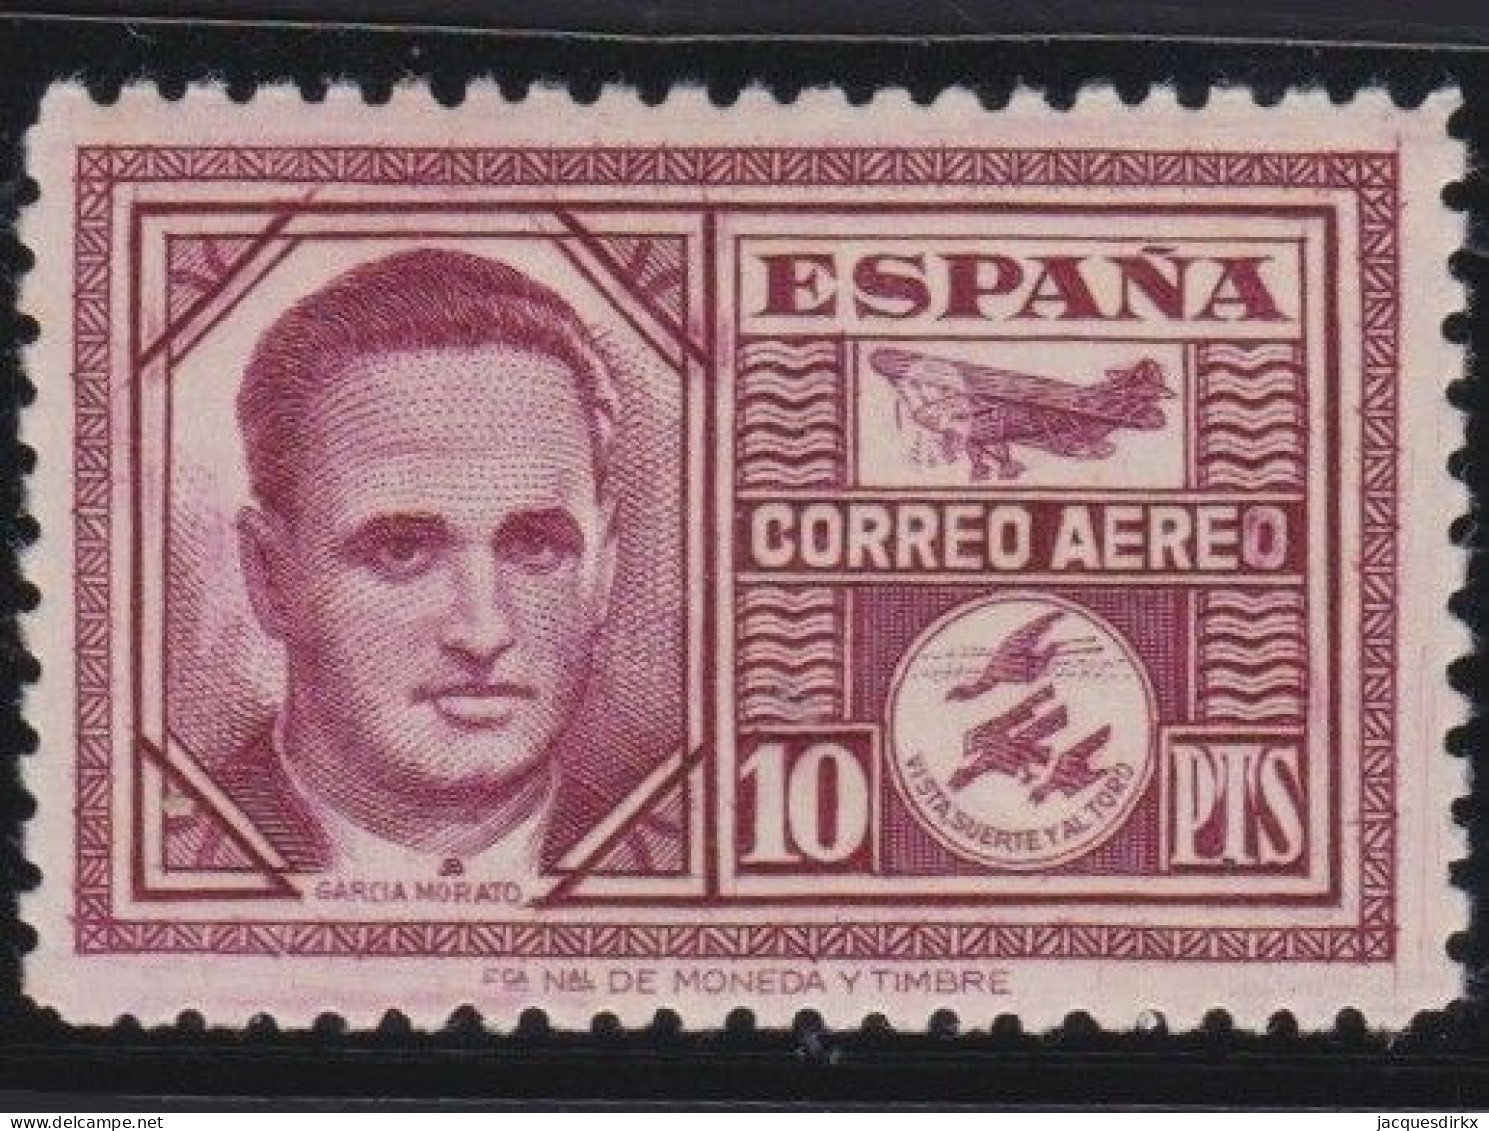 Espagne   .  Y&T   .     703   .    *    .    Neuf Avec Gomme - Unused Stamps